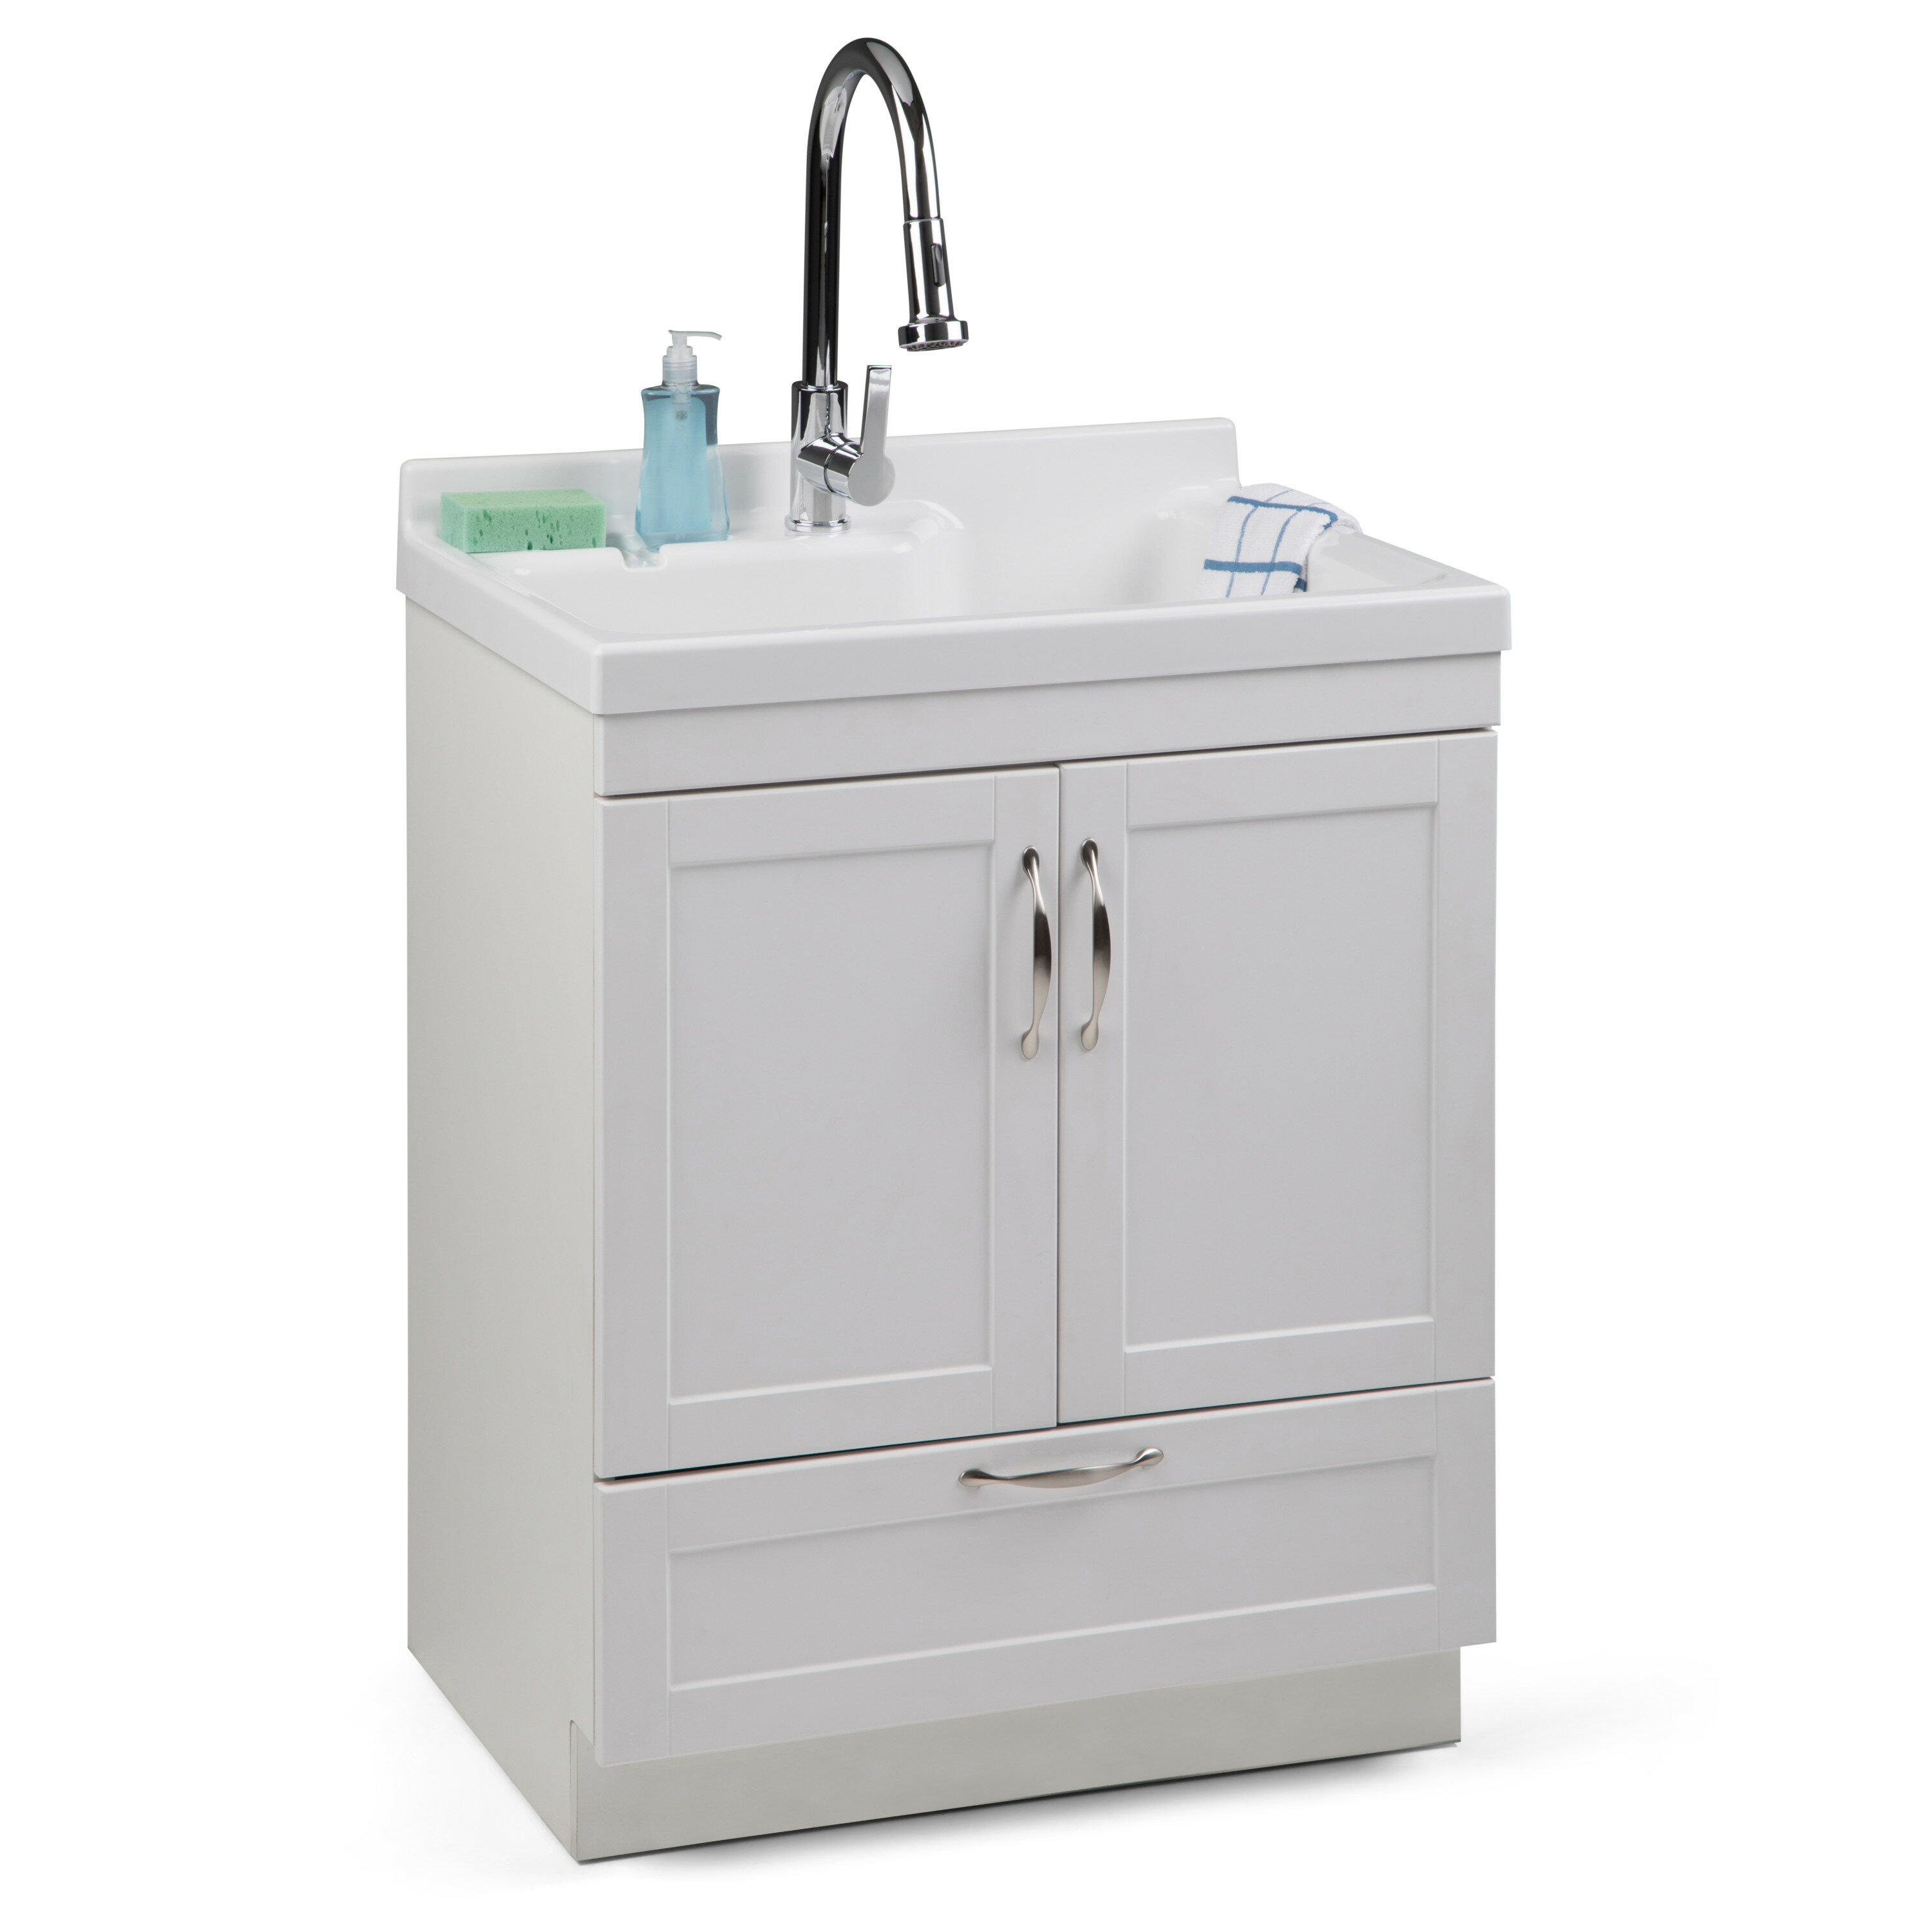 Freestanding Utility Sink Laundry Cabinet with Faucet Self contained 